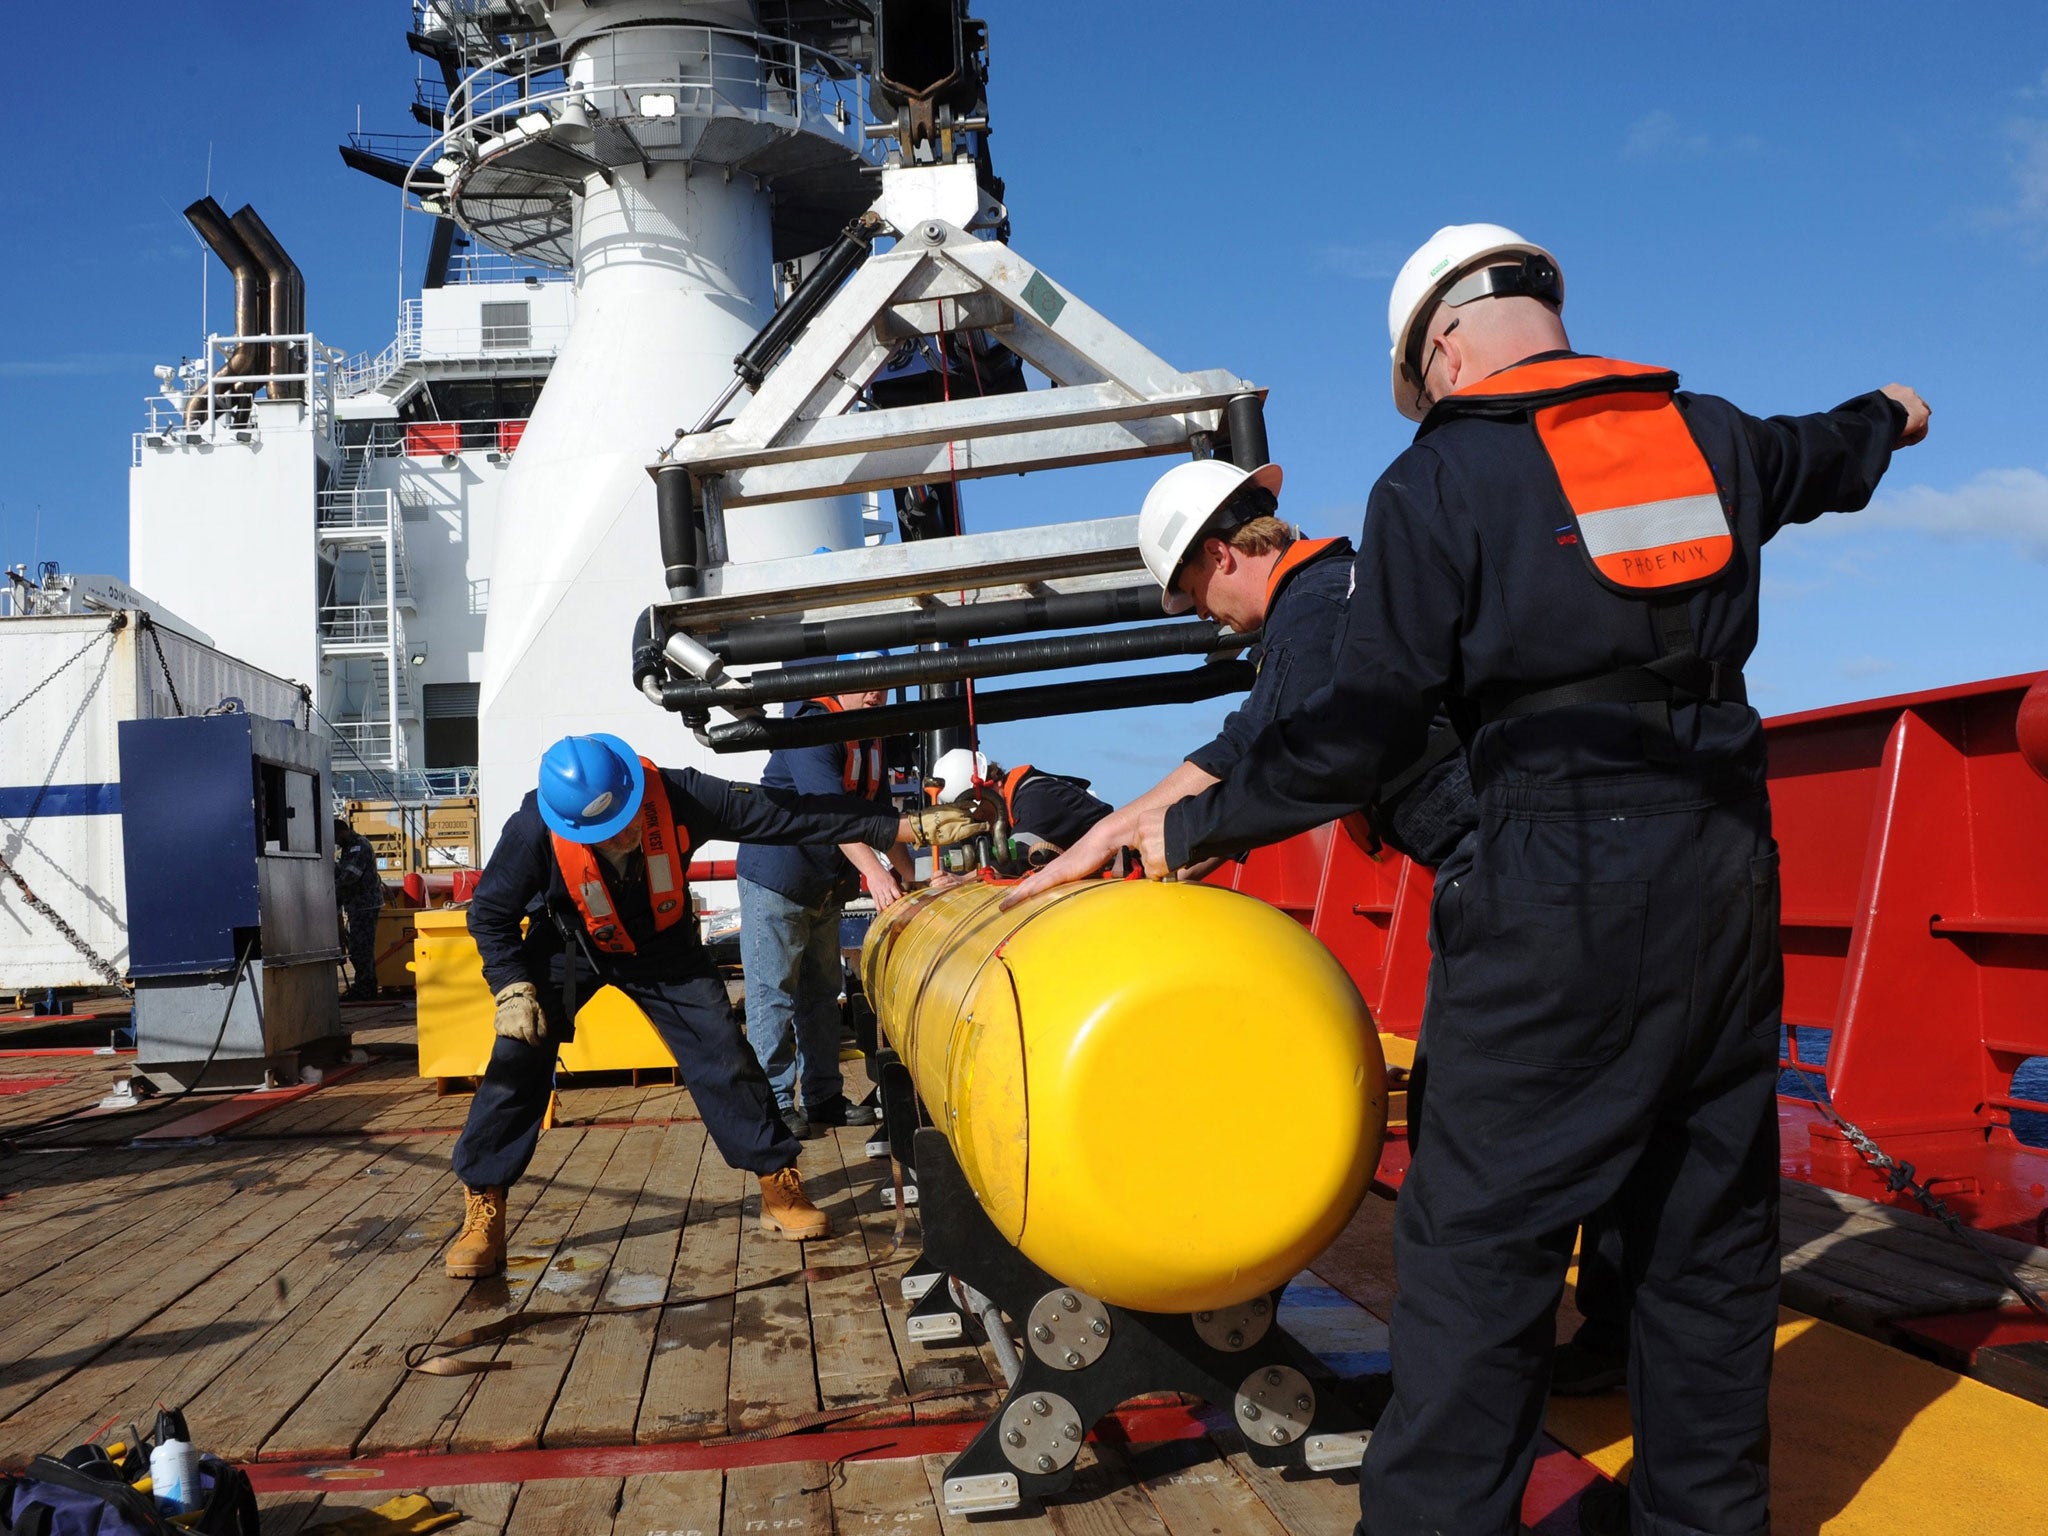 A handout picture made available by the US Navy on 4 April, 2014 shows an autonomous underwater vehicle (AUV) hoisted on board the Australian Ocean Shield after a successful buoyancy testing